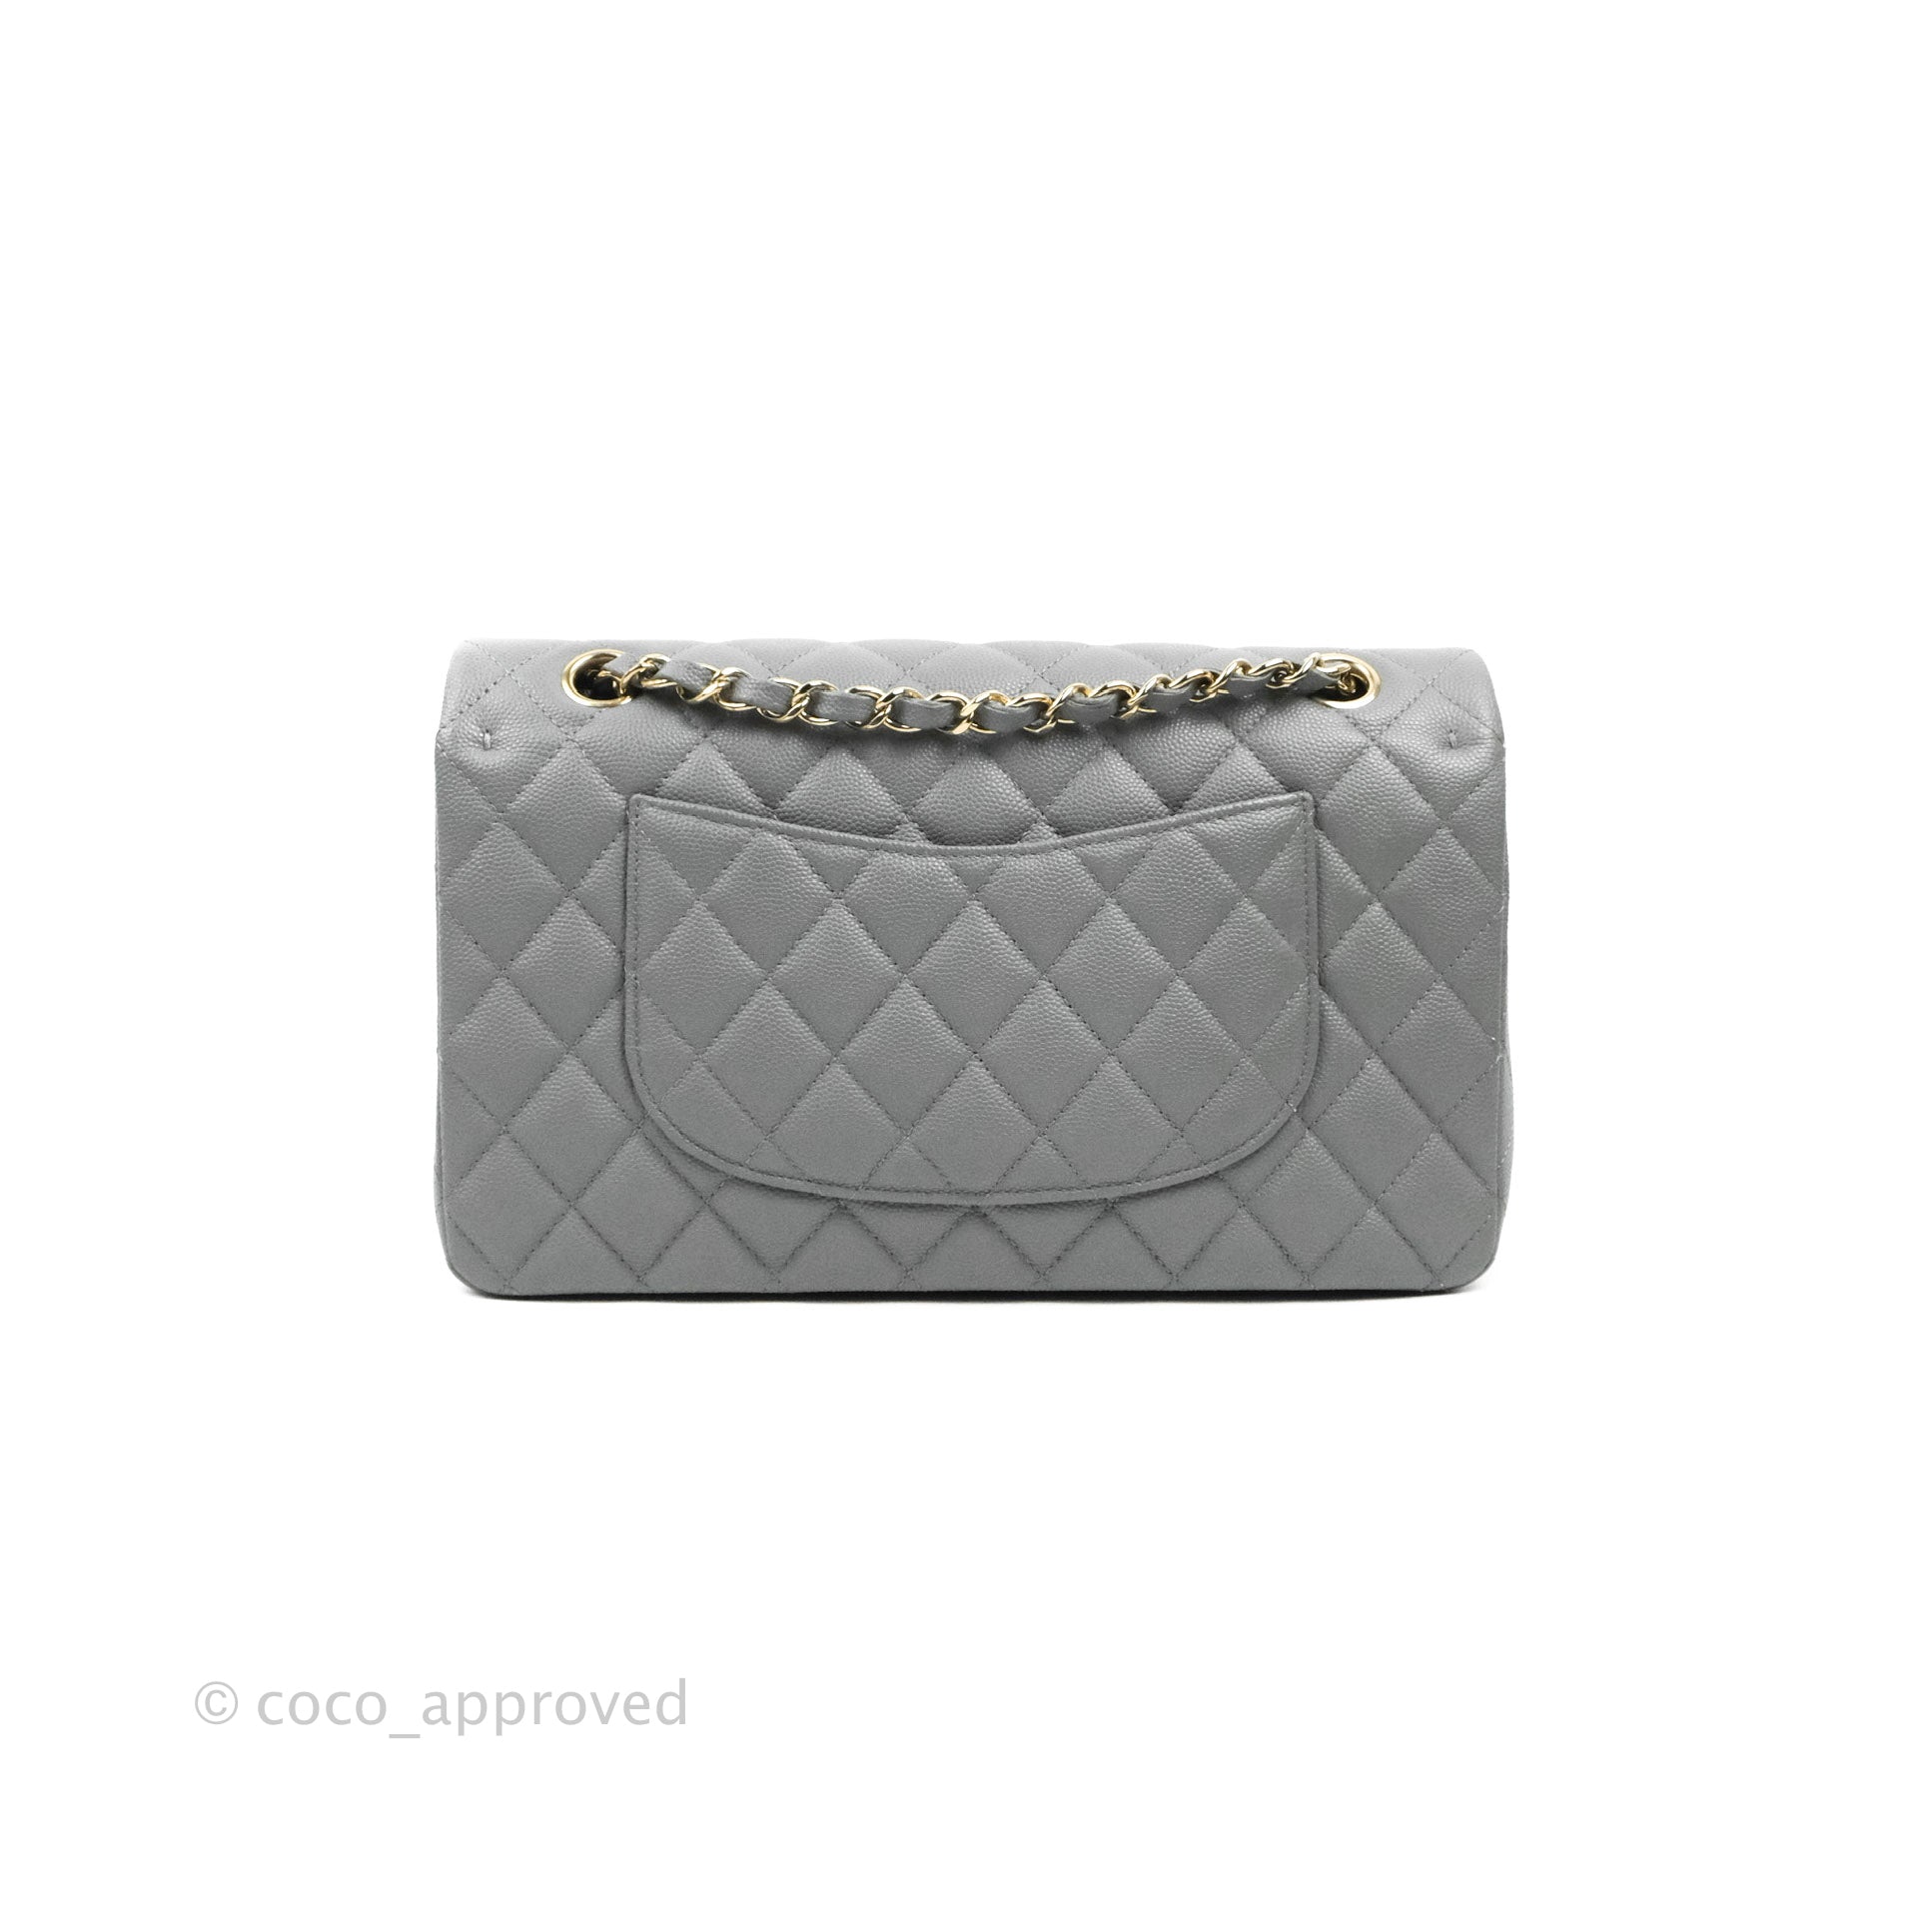 Chanel Grey Classic Leather Medium Classic Double Flap Bag Chanel